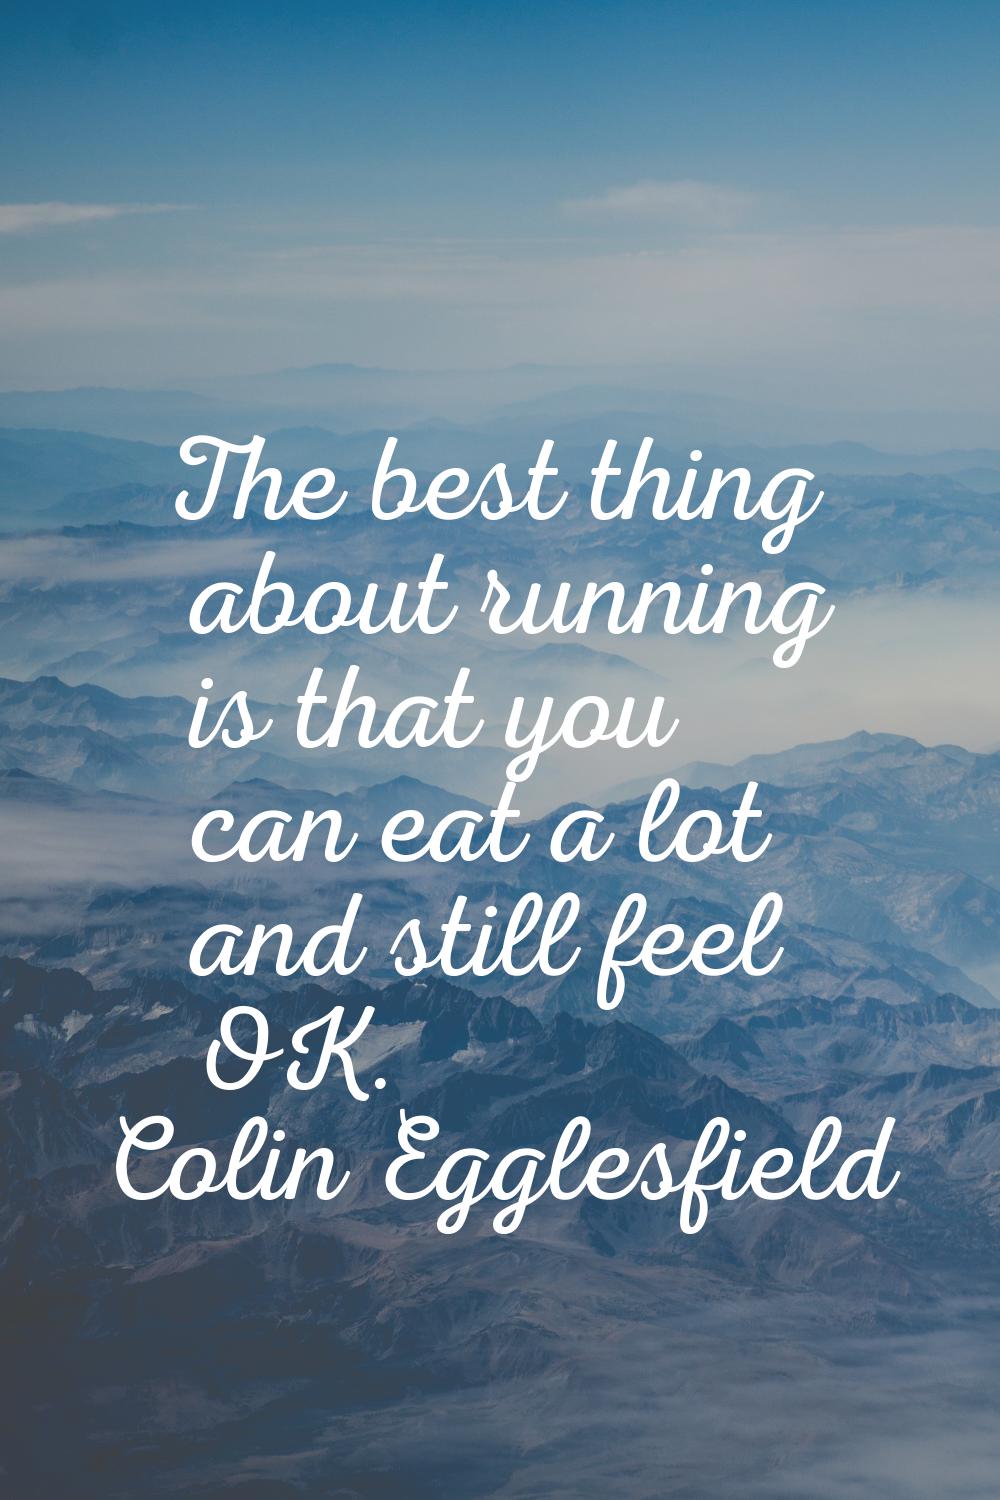 The best thing about running is that you can eat a lot and still feel OK.